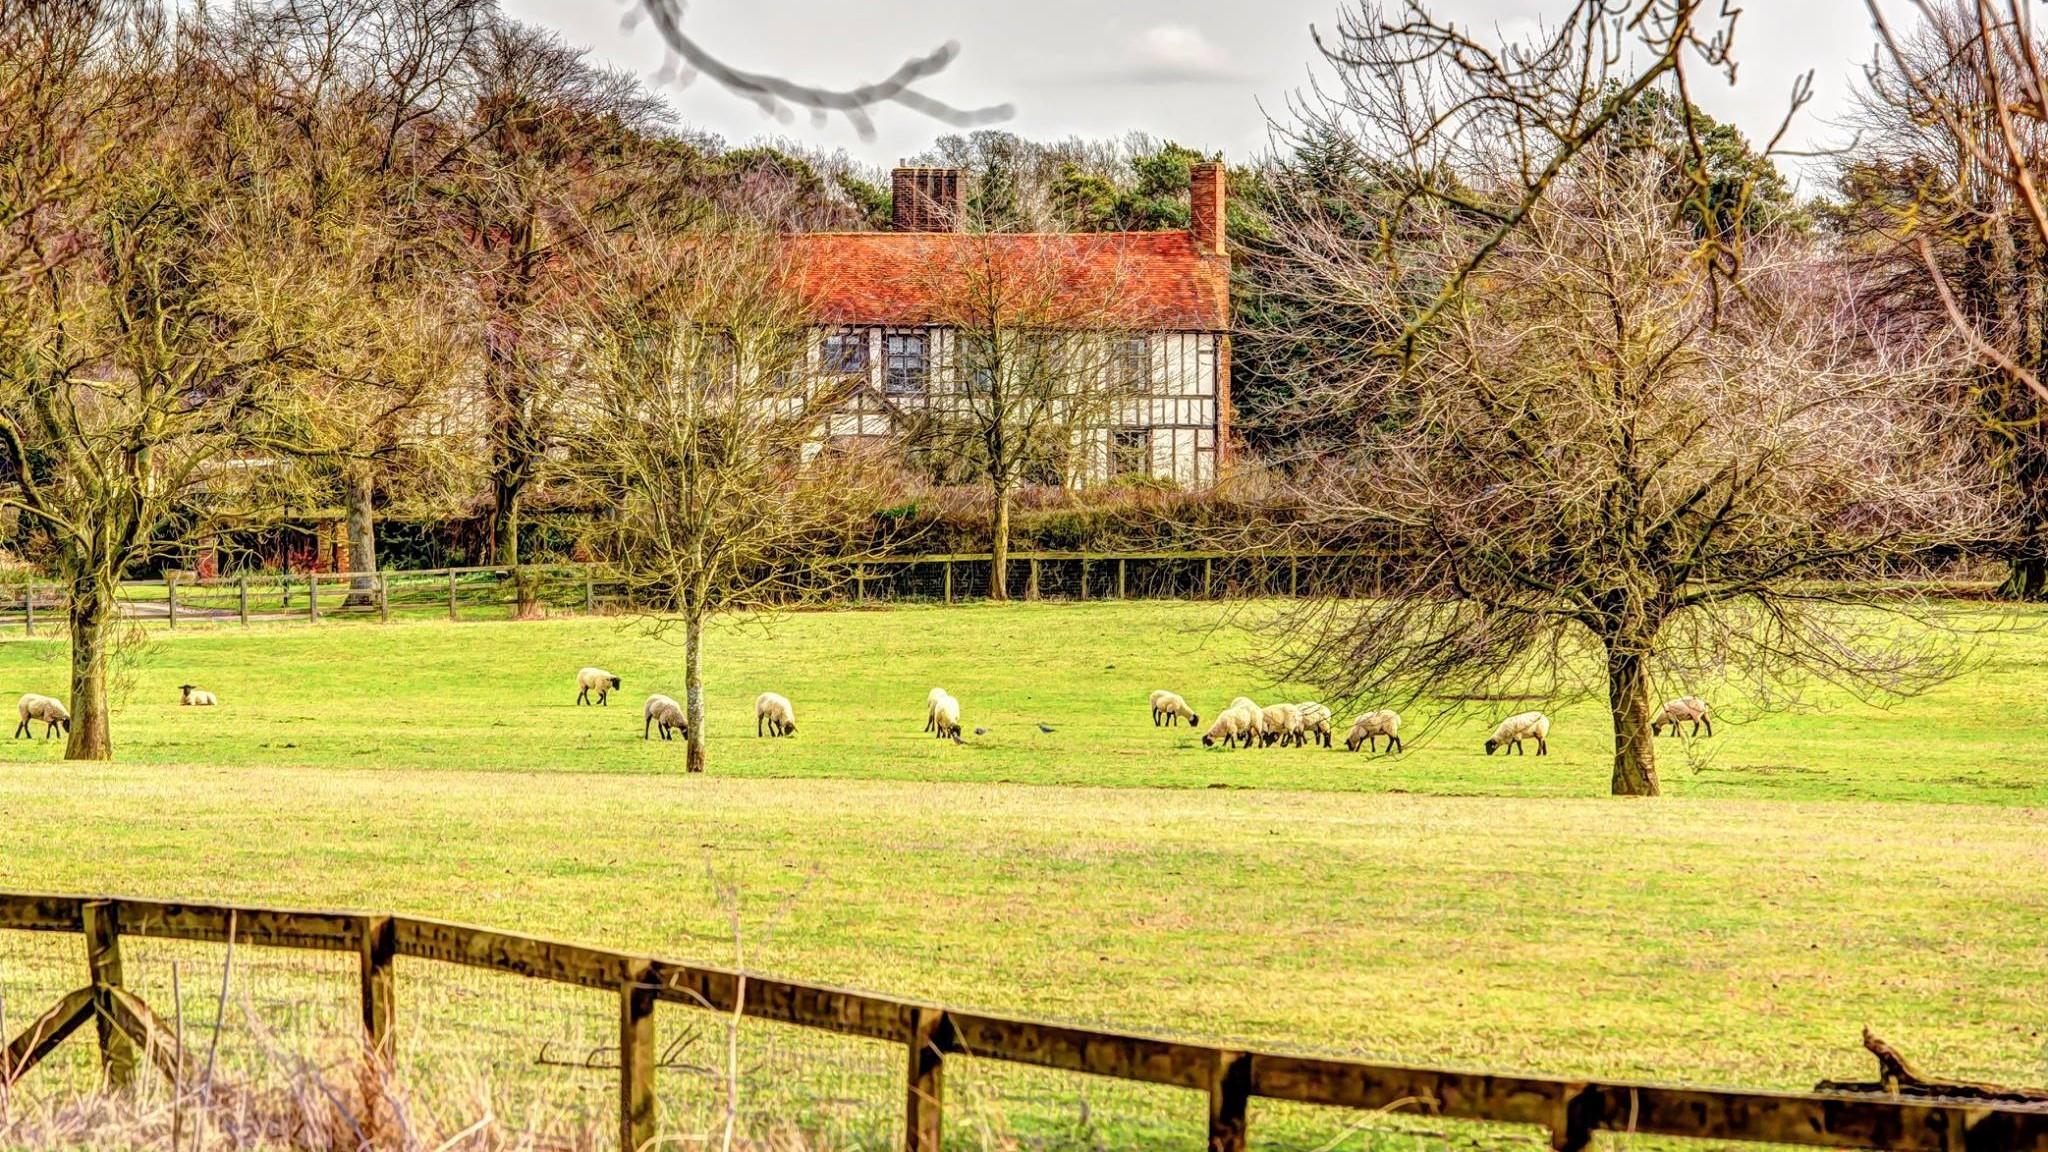 A landscape view of Alswick Hall Buntingford with sheep in the foreground